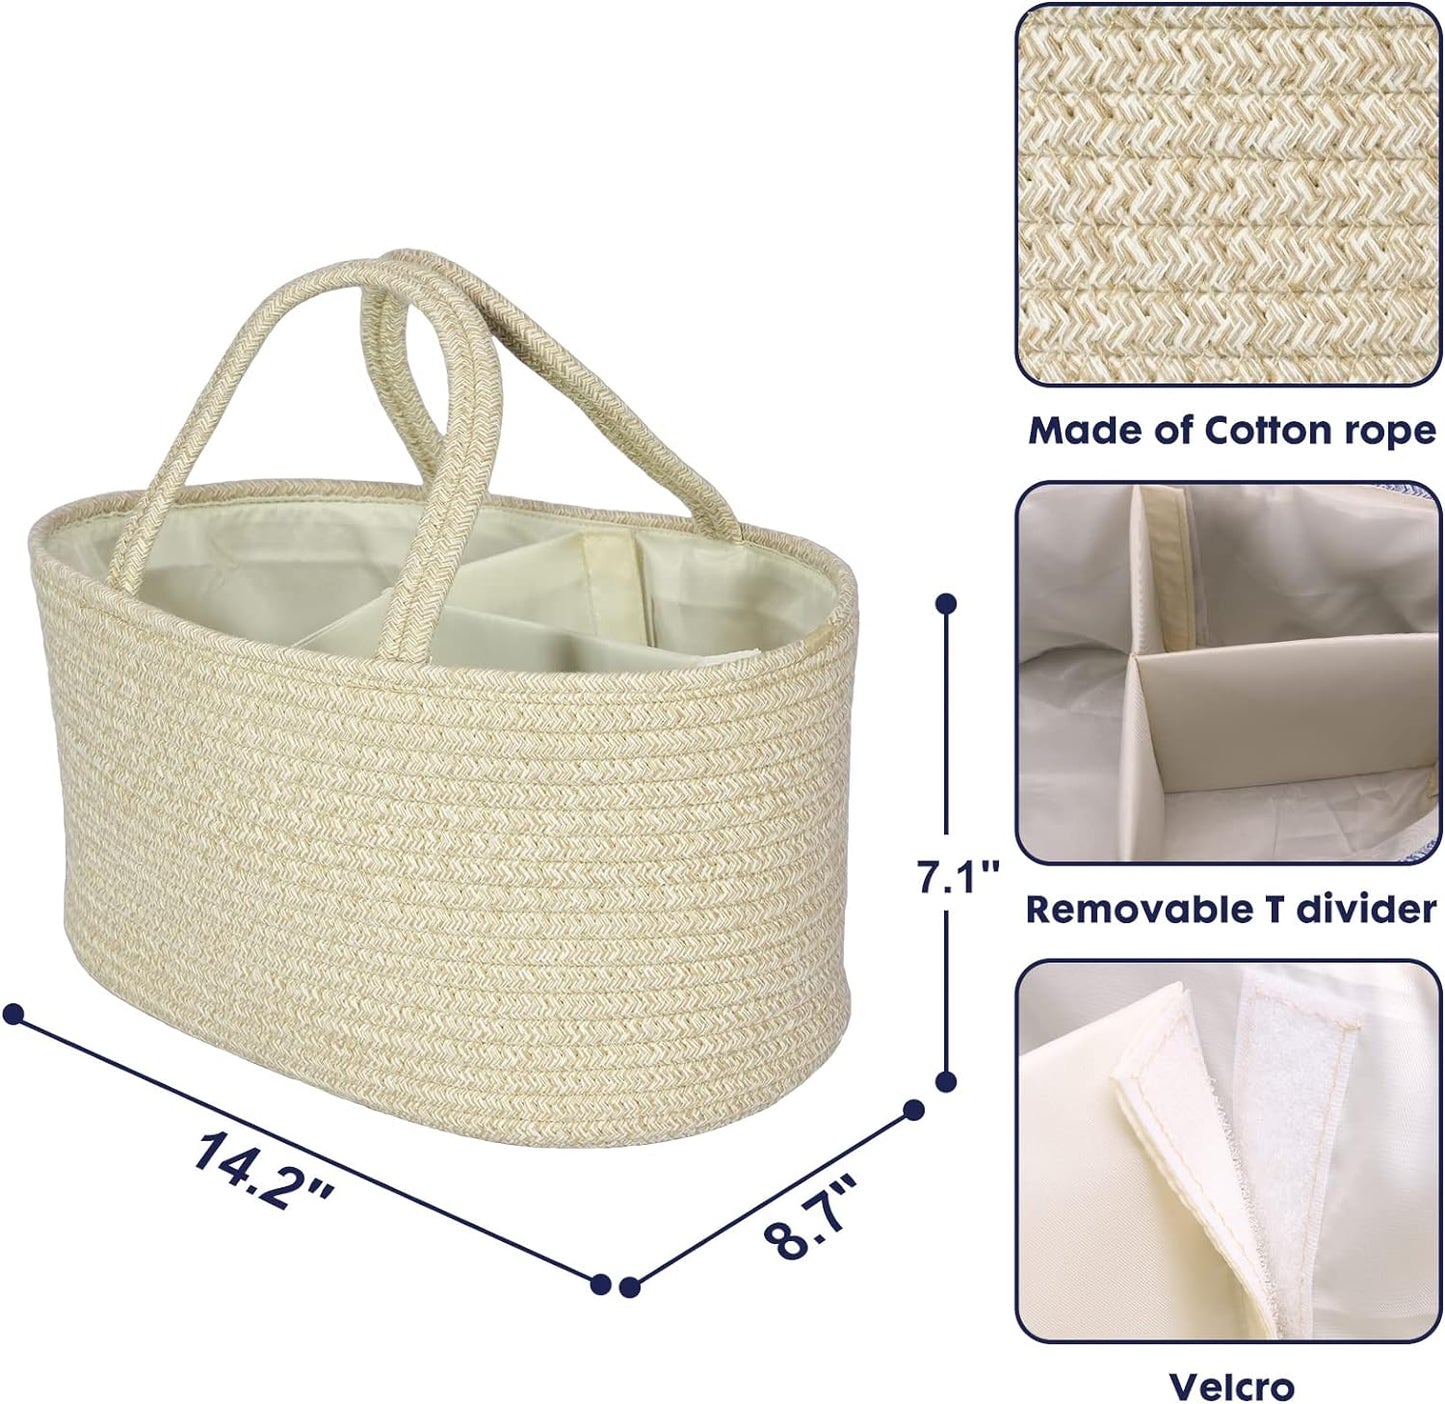 Baby Diaper Caddy Organizer for Girl Boy Cotton Rope Nursery Storage Bin Basket Portable Holder Tote Bag for Changing Table Car Travel Baby Shower Gifts Newborn Registry Must Have Items oatmeal